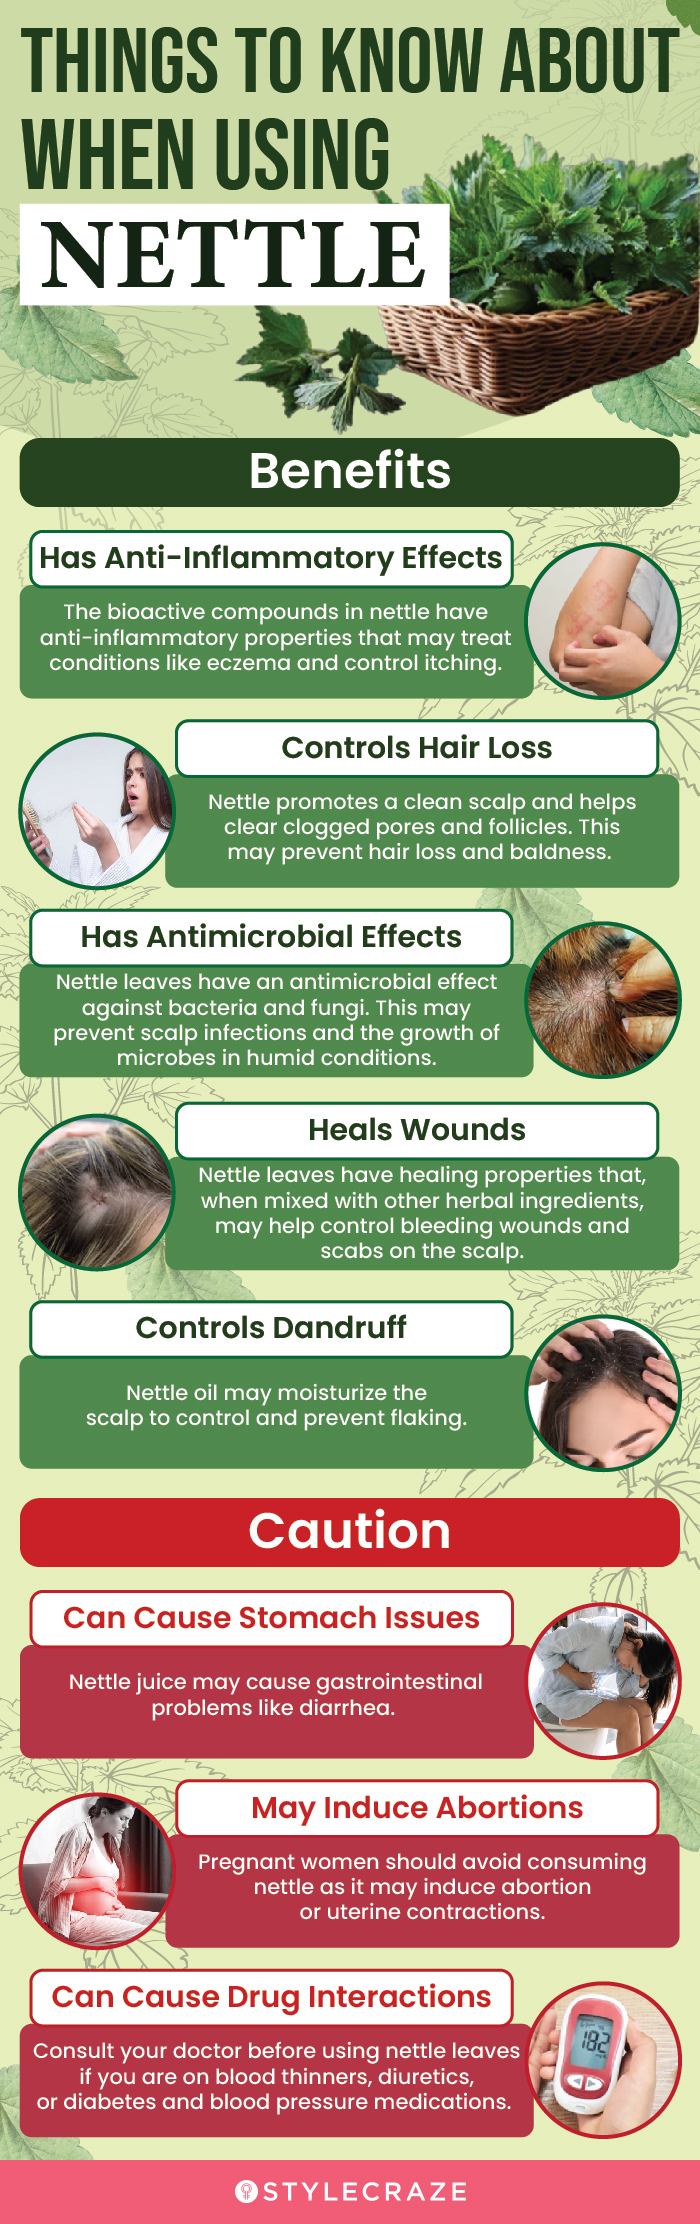 things to know about when using nettle (infographic)